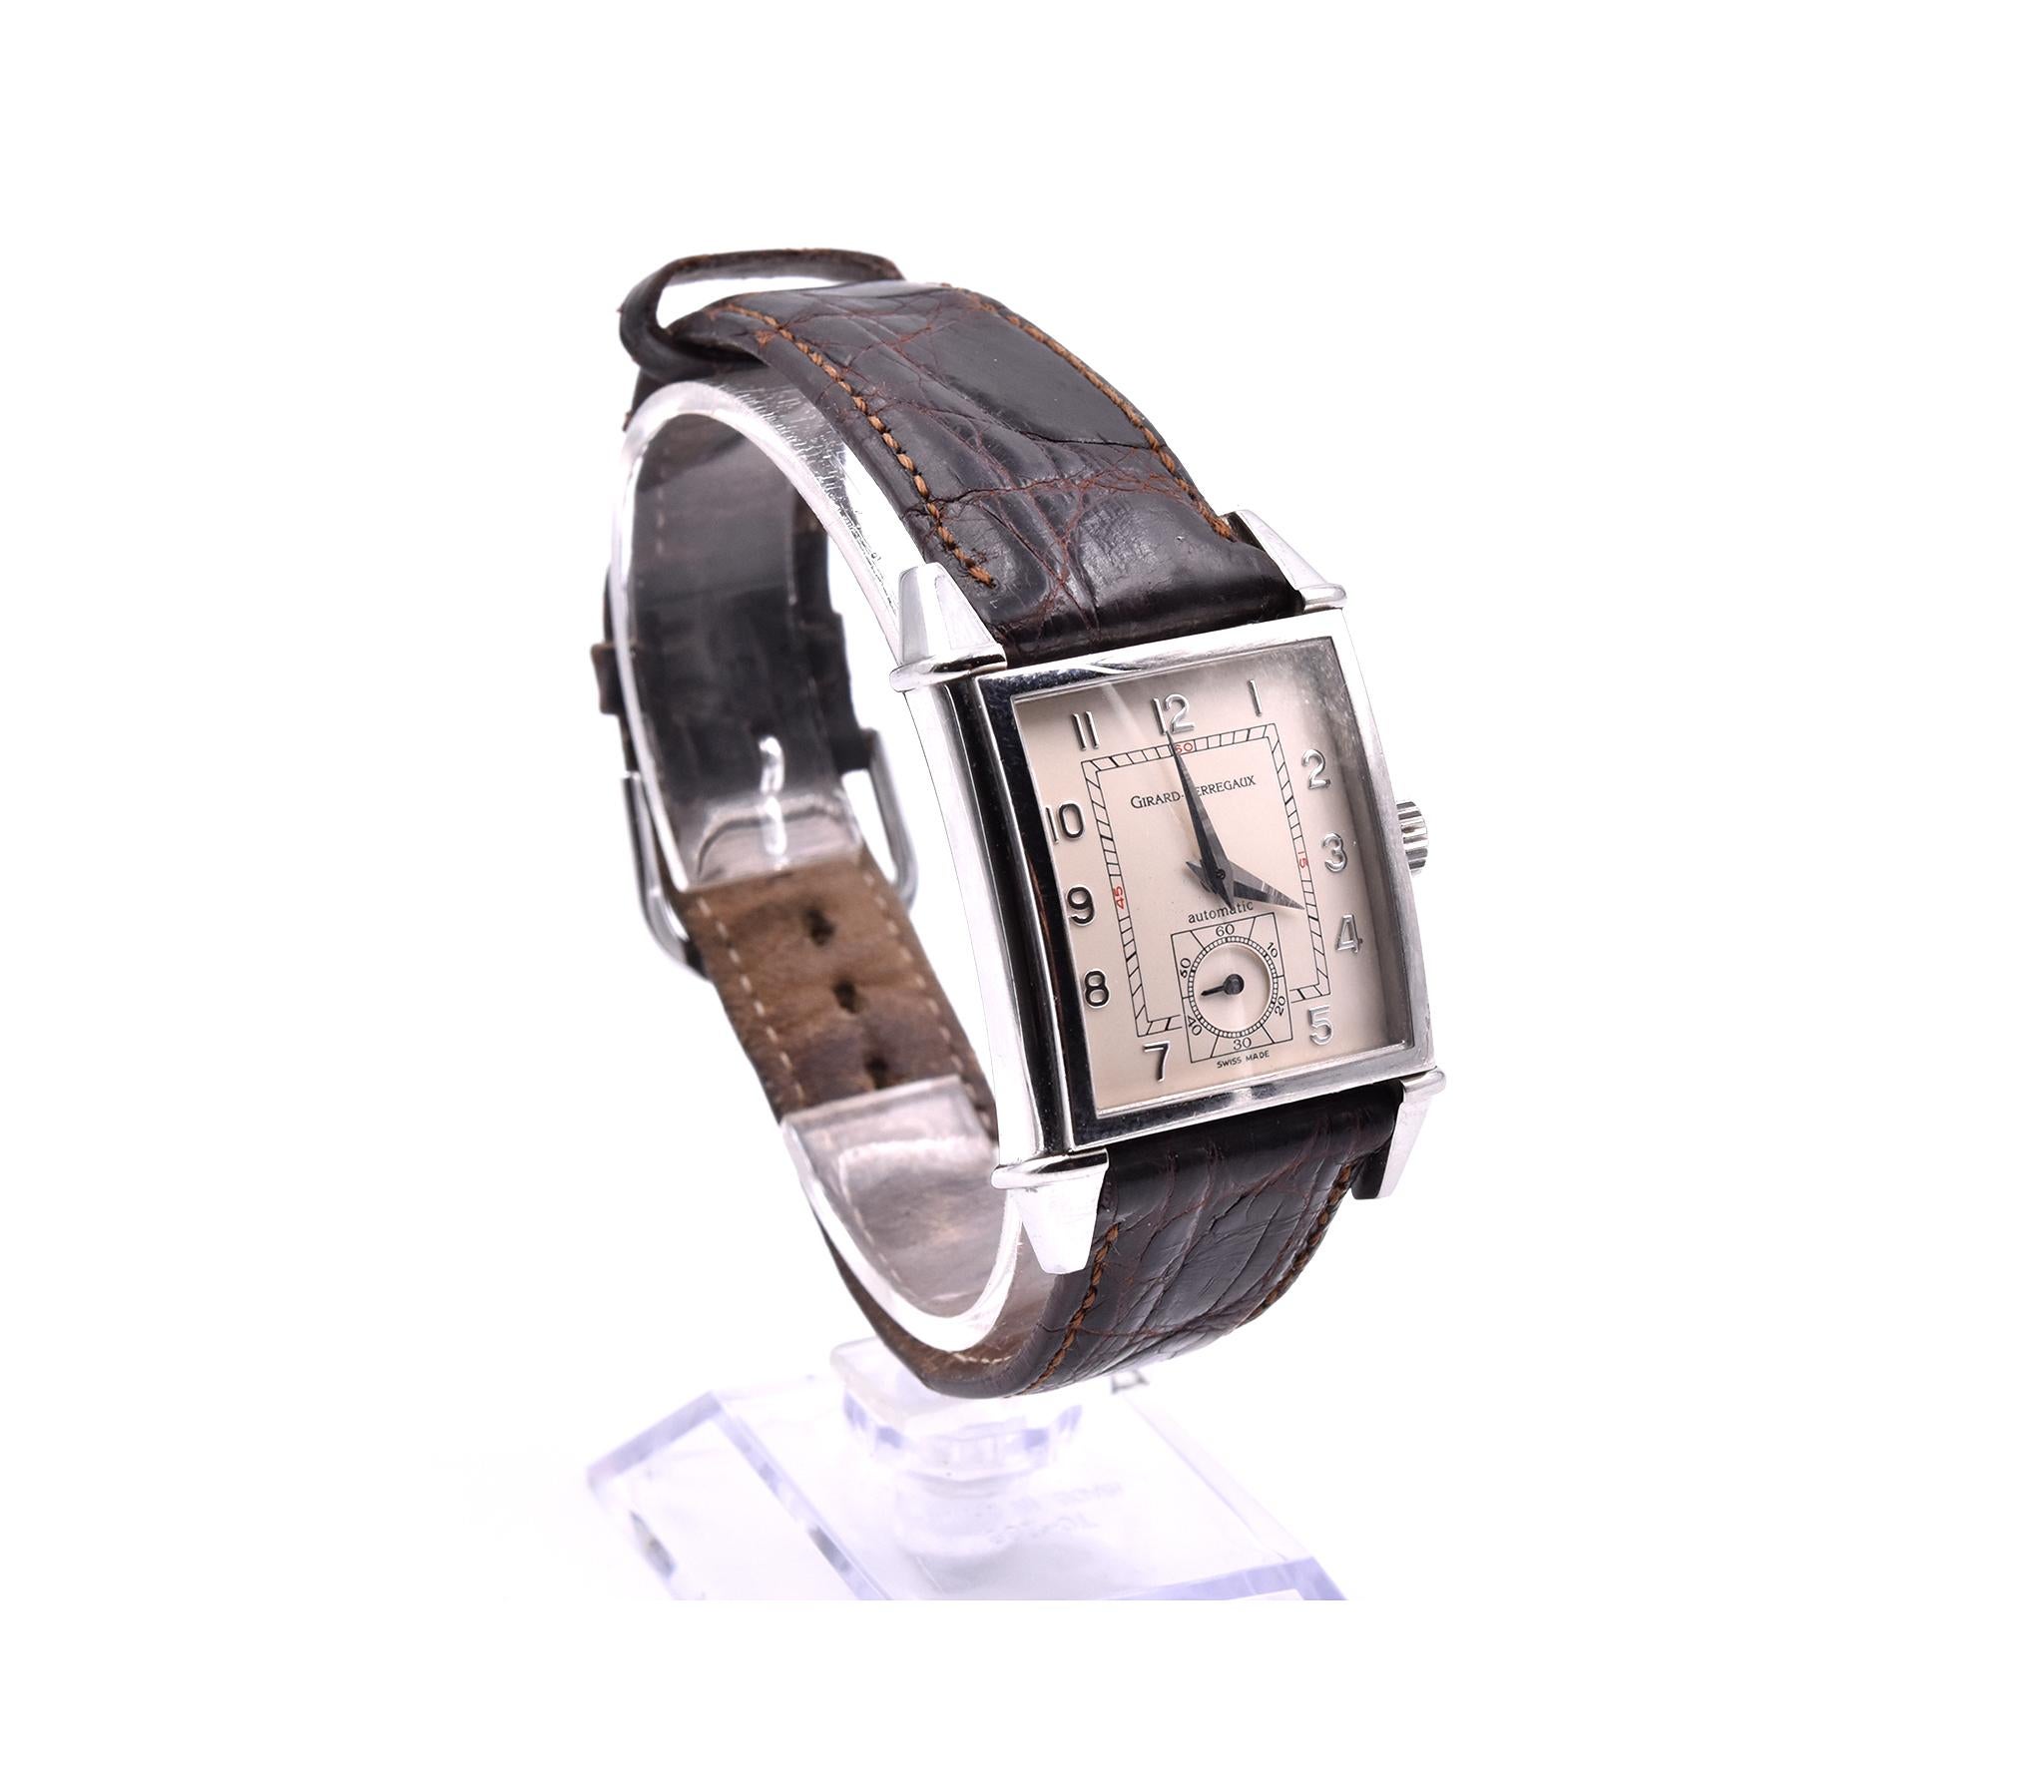 Movement: winding crown
Function: hours, minutes, small seconds
Case: rectangular 28mm x 42mm (including lugs) stainless steel case with sapphire crystal, see-through back
Band: brown alligator leather strap with stainless steel tang buckle
Dial: